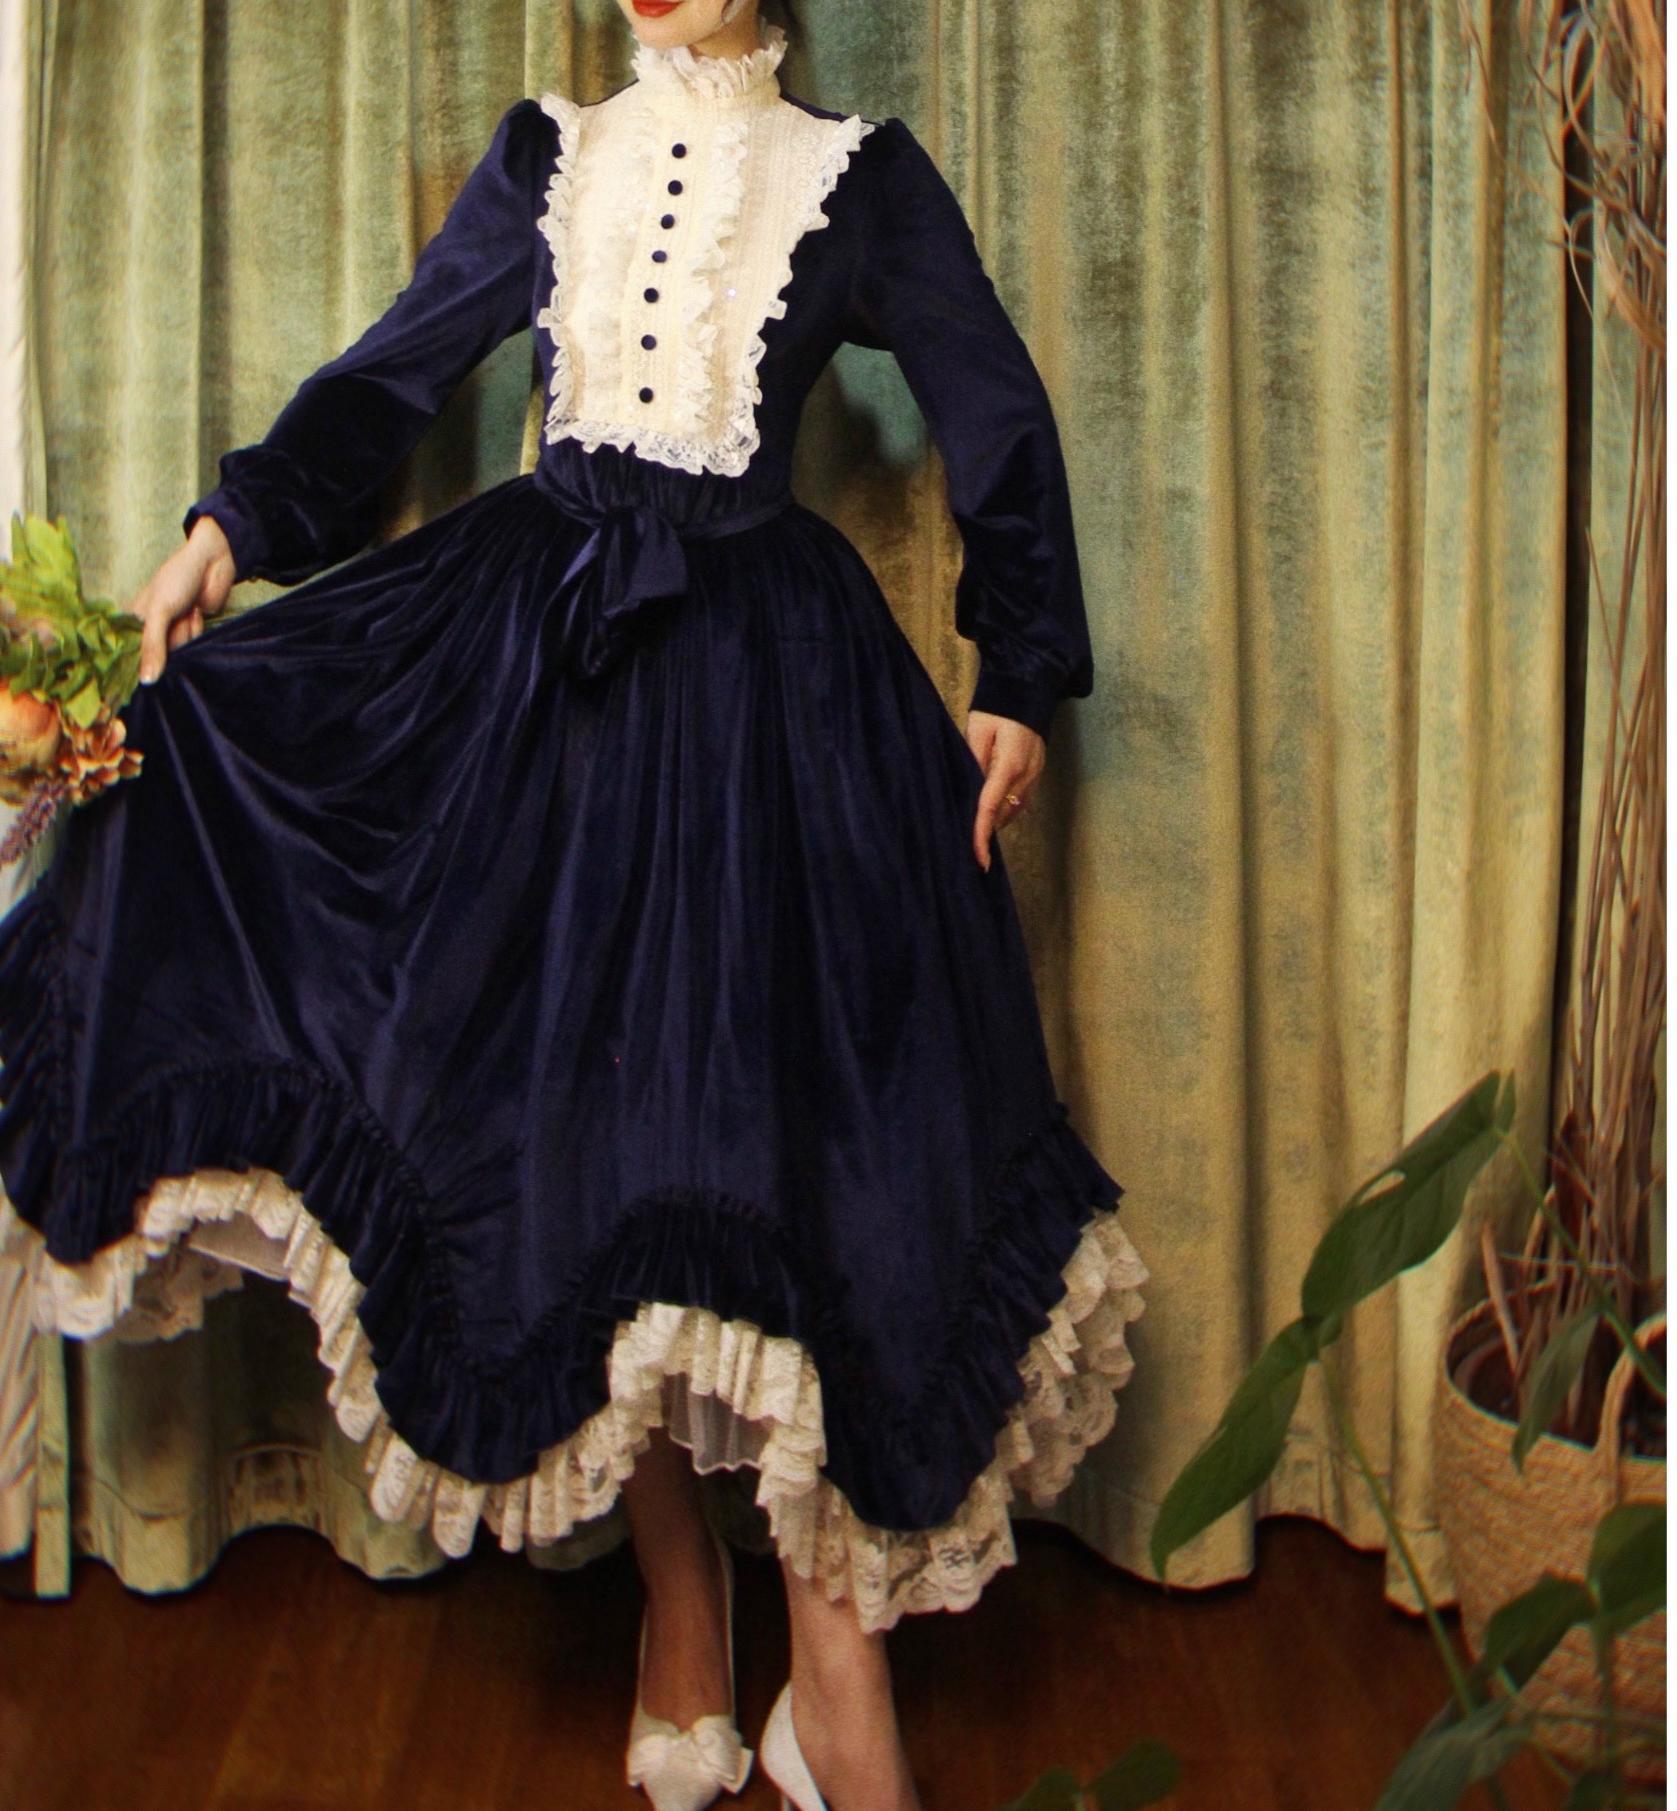 dress from the 1900s